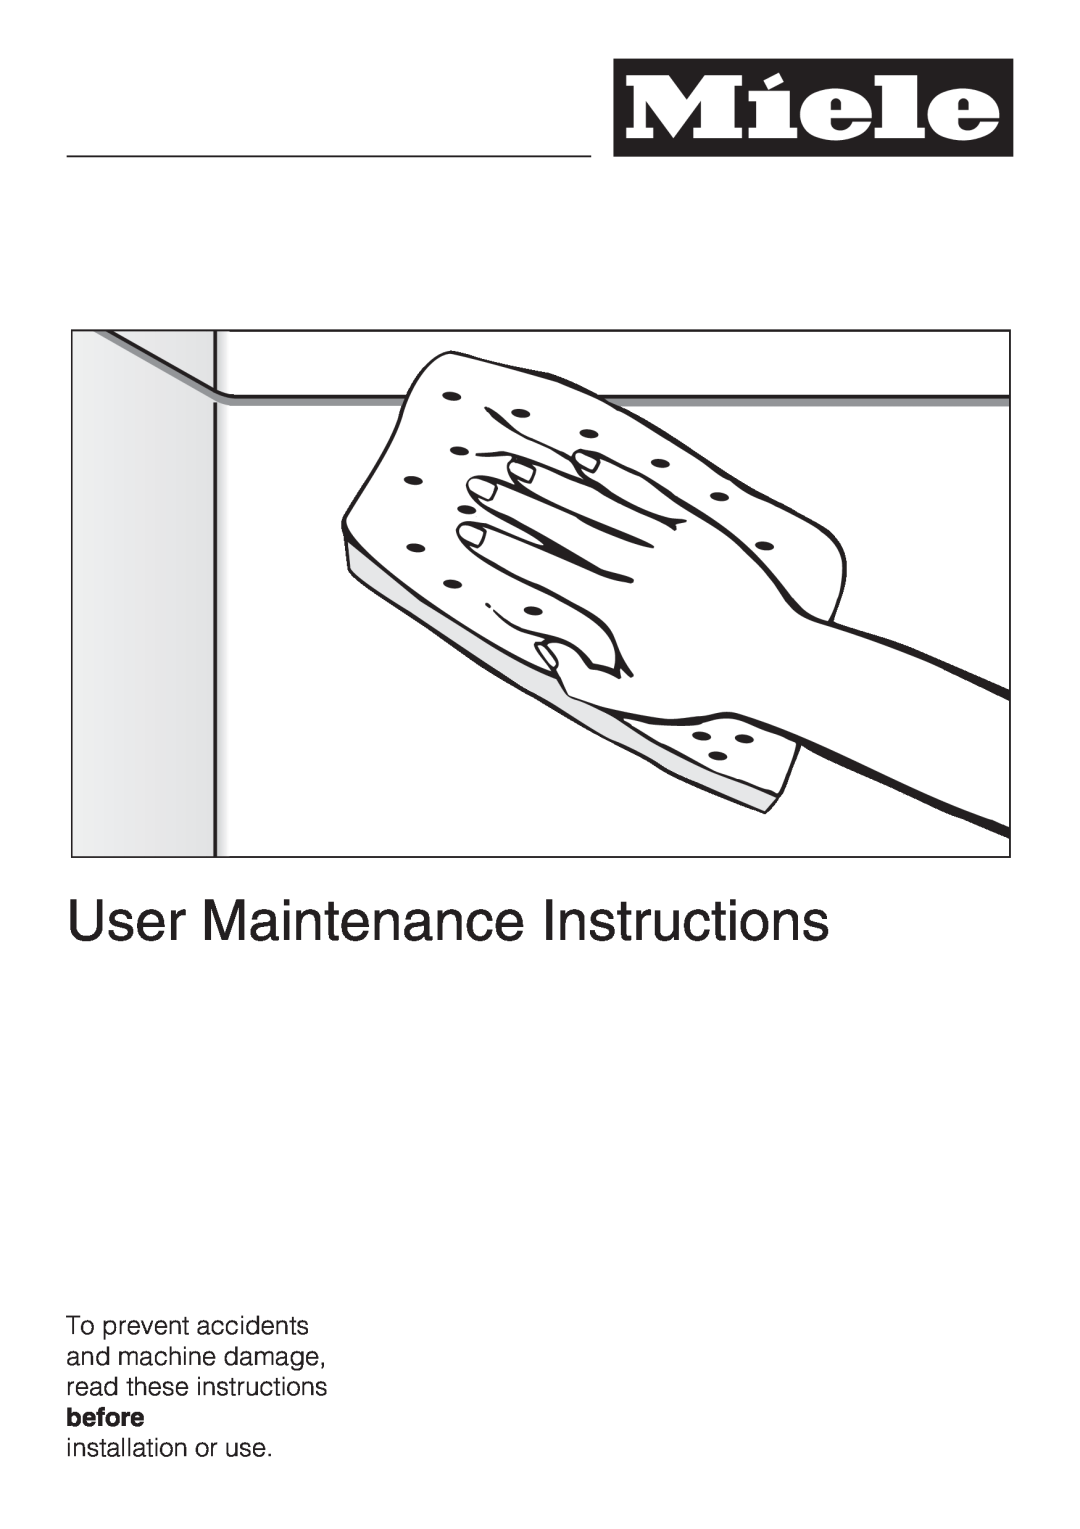 Miele G 4286, G 4281 manual User Maintenance Instructions, installation or use 